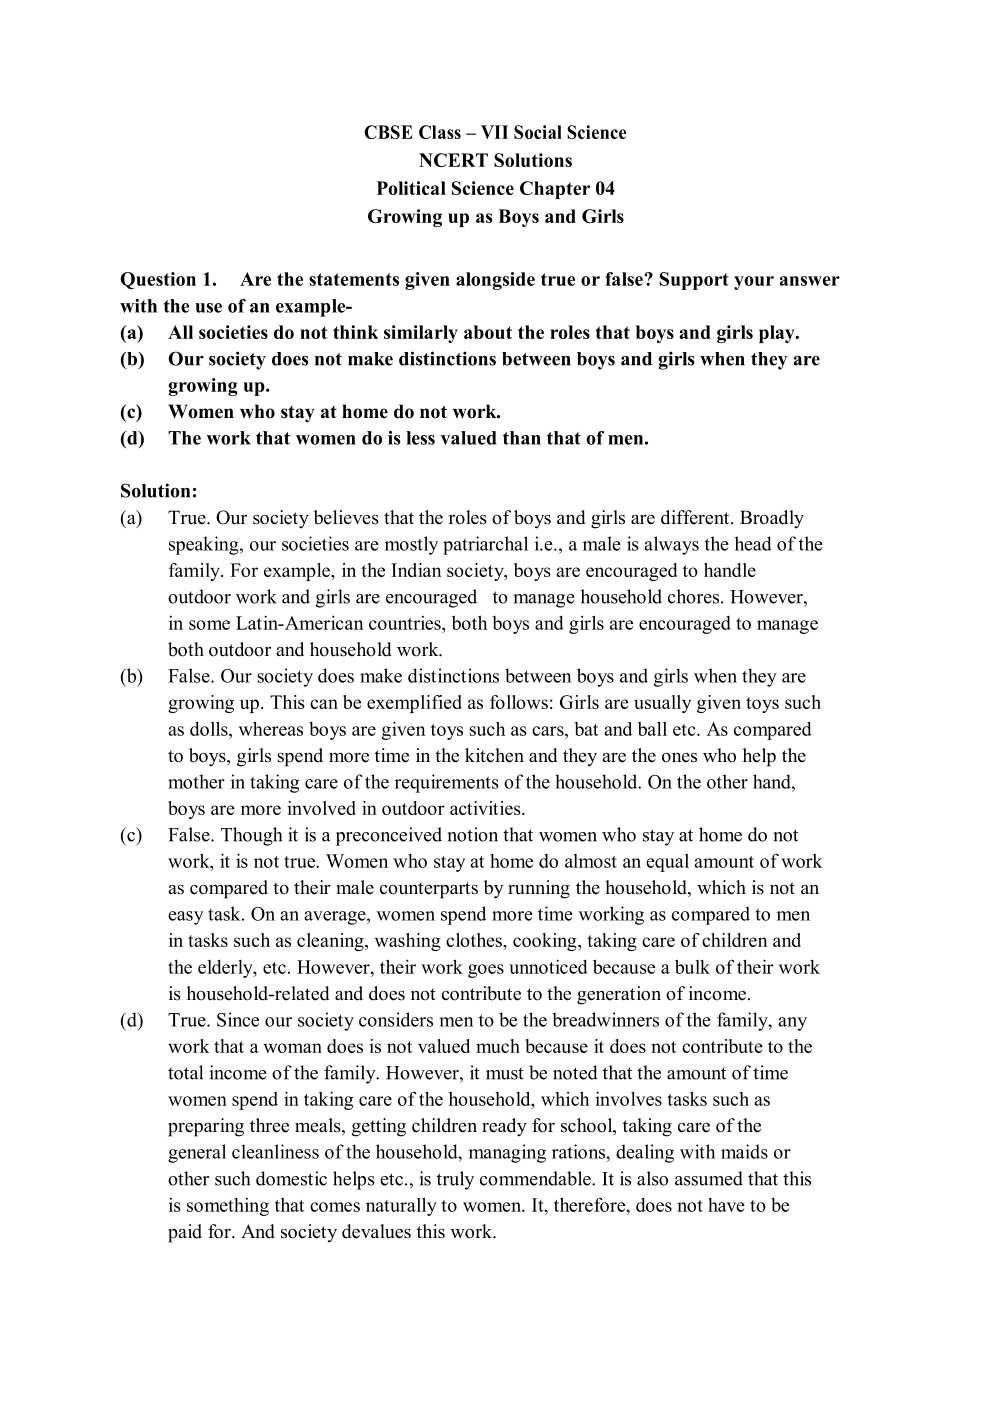 NCERT Solutions For Class 7 social science social and political life chapter 4